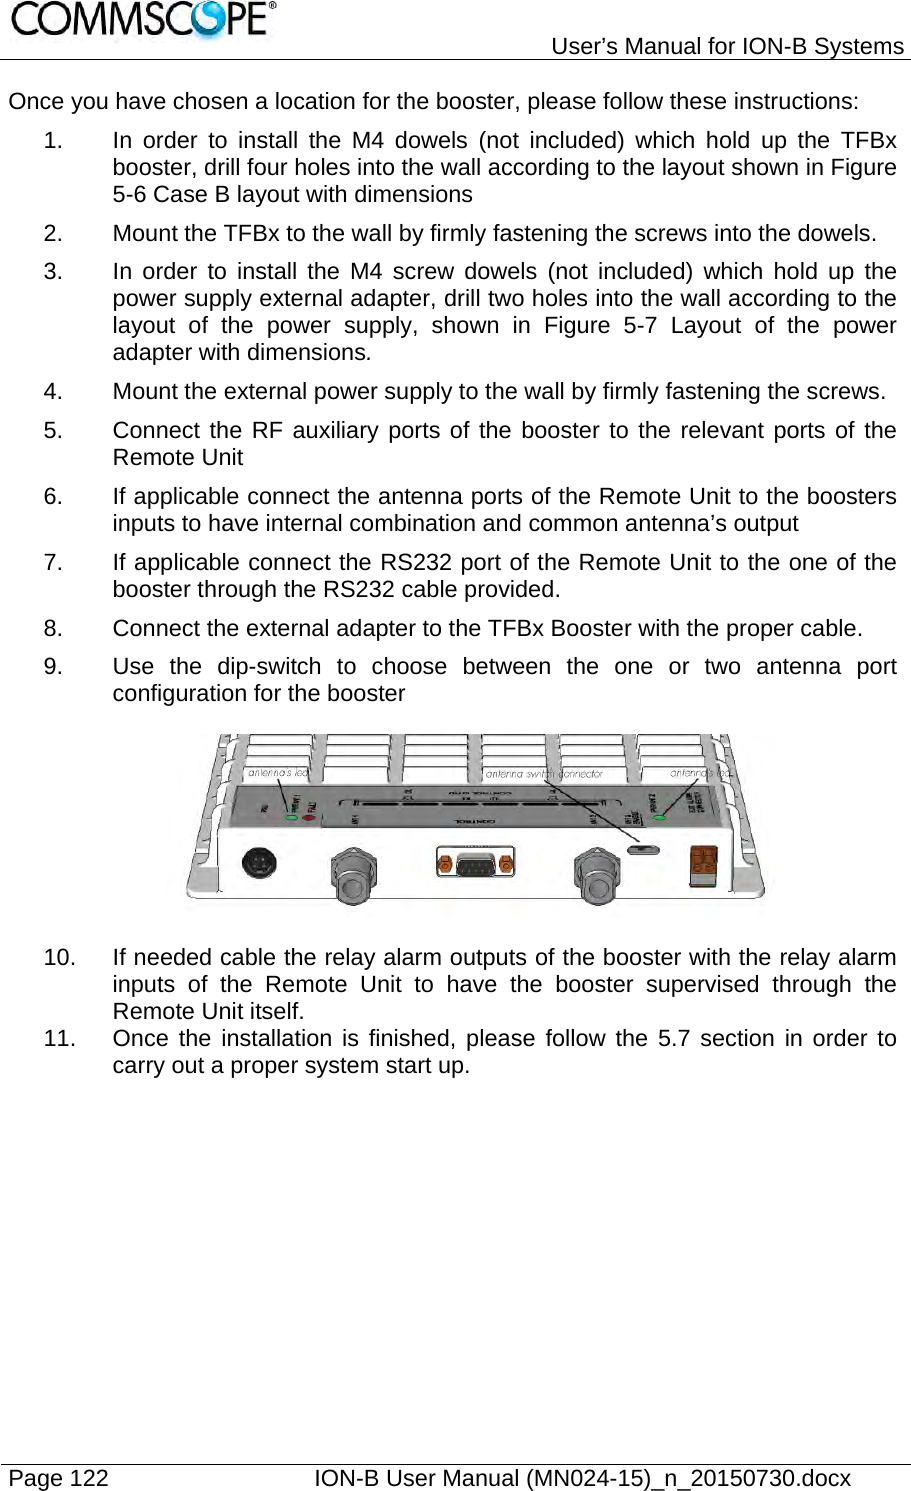   User’s Manual for ION-B Systems Page 122    ION-B User Manual (MN024-15)_n_20150730.docx  Once you have chosen a location for the booster, please follow these instructions: 1.  In order to install the M4 dowels (not included) which hold up the TFBx booster, drill four holes into the wall according to the layout shown in Figure 5-6 Case B layout with dimensions 2.  Mount the TFBx to the wall by firmly fastening the screws into the dowels. 3.  In order to install the M4 screw dowels (not included) which hold up the power supply external adapter, drill two holes into the wall according to the layout of the power supply, shown in Figure 5-7 Layout of the power adapter with dimensions. 4.  Mount the external power supply to the wall by firmly fastening the screws. 5.  Connect the RF auxiliary ports of the booster to the relevant ports of the Remote Unit 6.  If applicable connect the antenna ports of the Remote Unit to the boosters inputs to have internal combination and common antenna’s output 7.  If applicable connect the RS232 port of the Remote Unit to the one of the booster through the RS232 cable provided. 8.  Connect the external adapter to the TFBx Booster with the proper cable. 9.  Use the dip-switch to choose between the one or two antenna port configuration for the booster    10.  If needed cable the relay alarm outputs of the booster with the relay alarm inputs of the Remote Unit to have the booster supervised through the Remote Unit itself. 11.  Once the installation is finished, please follow the 5.7 section in order to carry out a proper system start up.  